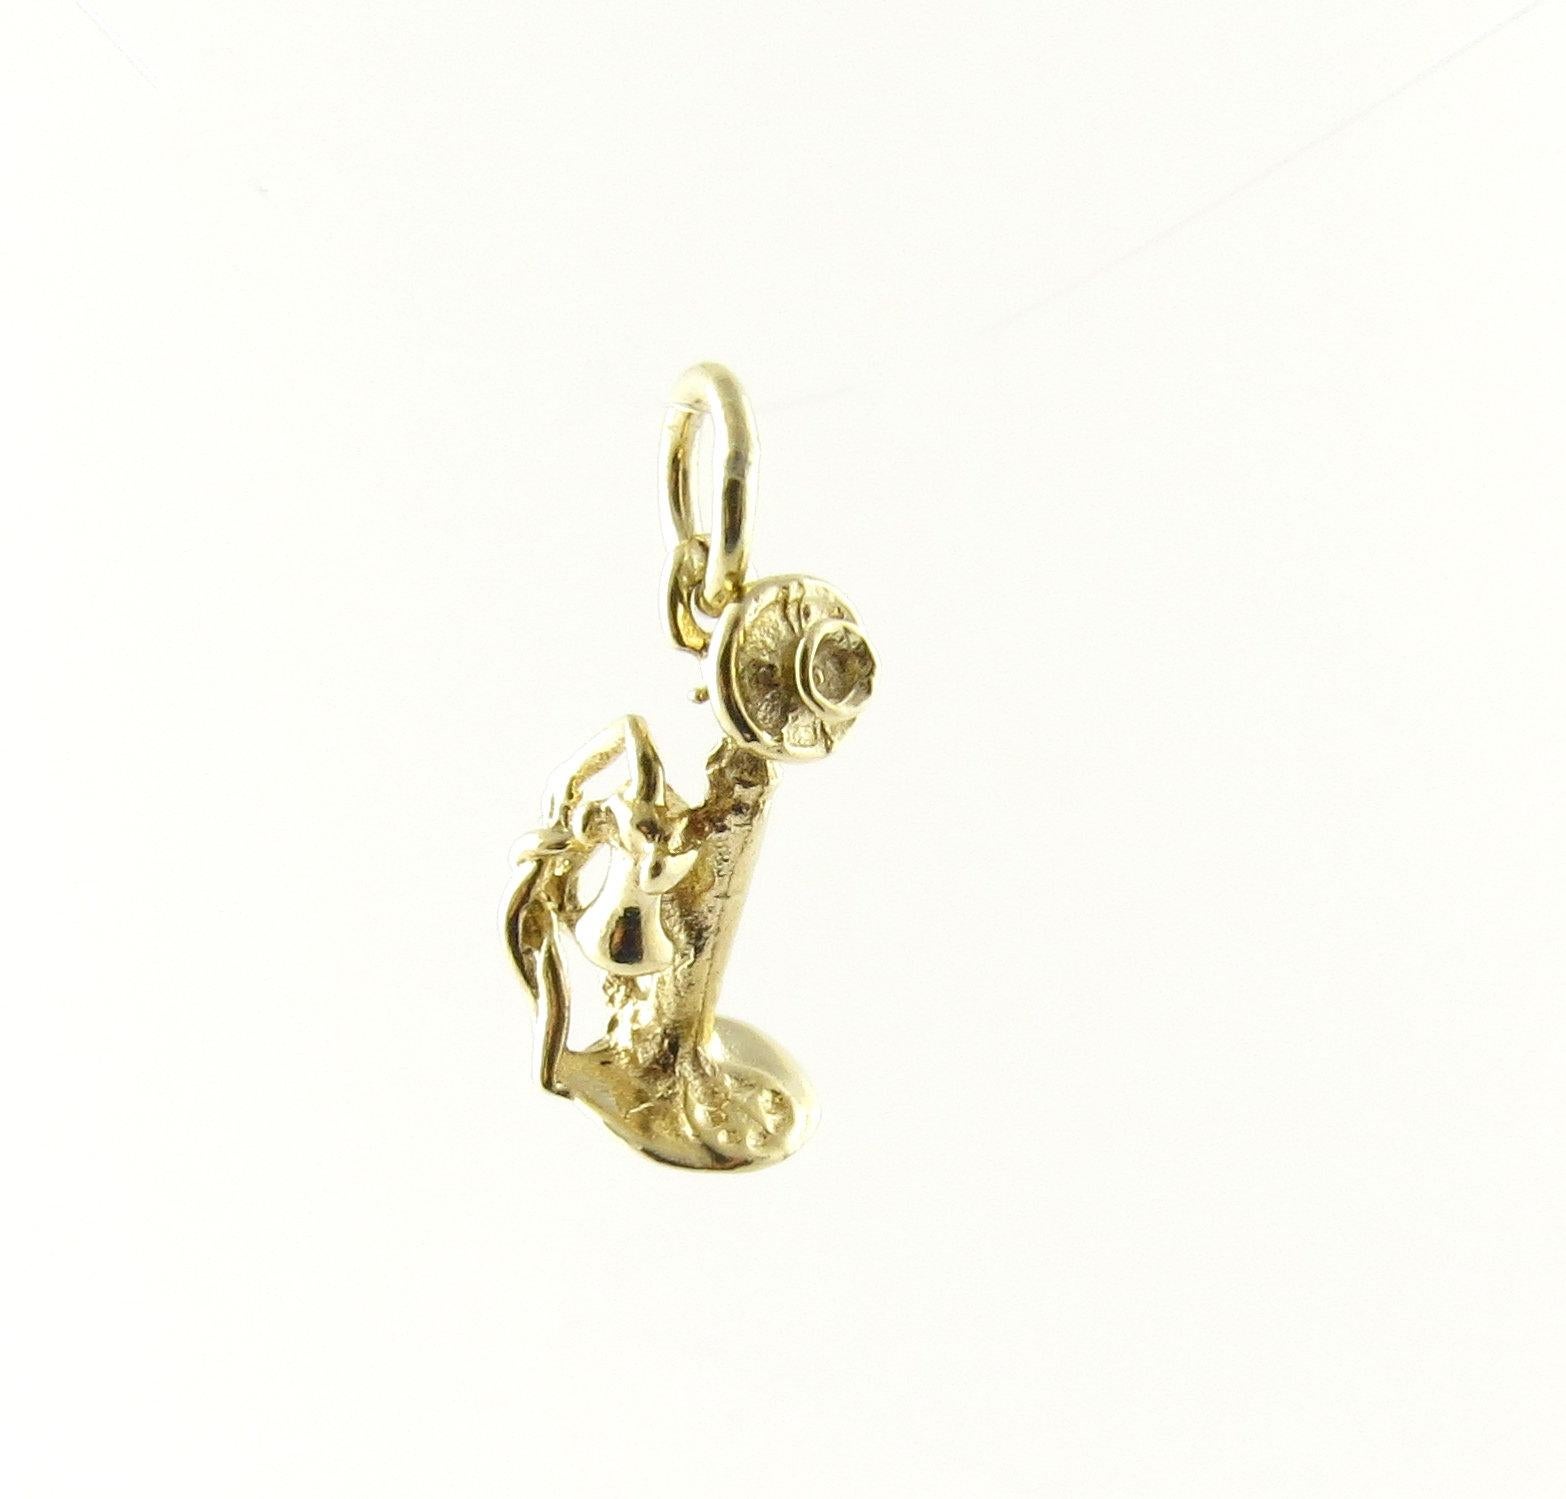 Vintage 14 Karat Yellow Gold Old-Fashioned Candlestick Telephone Charm- 
Go back to a simpler time! 
This lovely 3D charm features a miniature candlestick telephone meticulously detailed in 14K yellow gold. 
Size: 15 mm x 9 mm (actual charm)